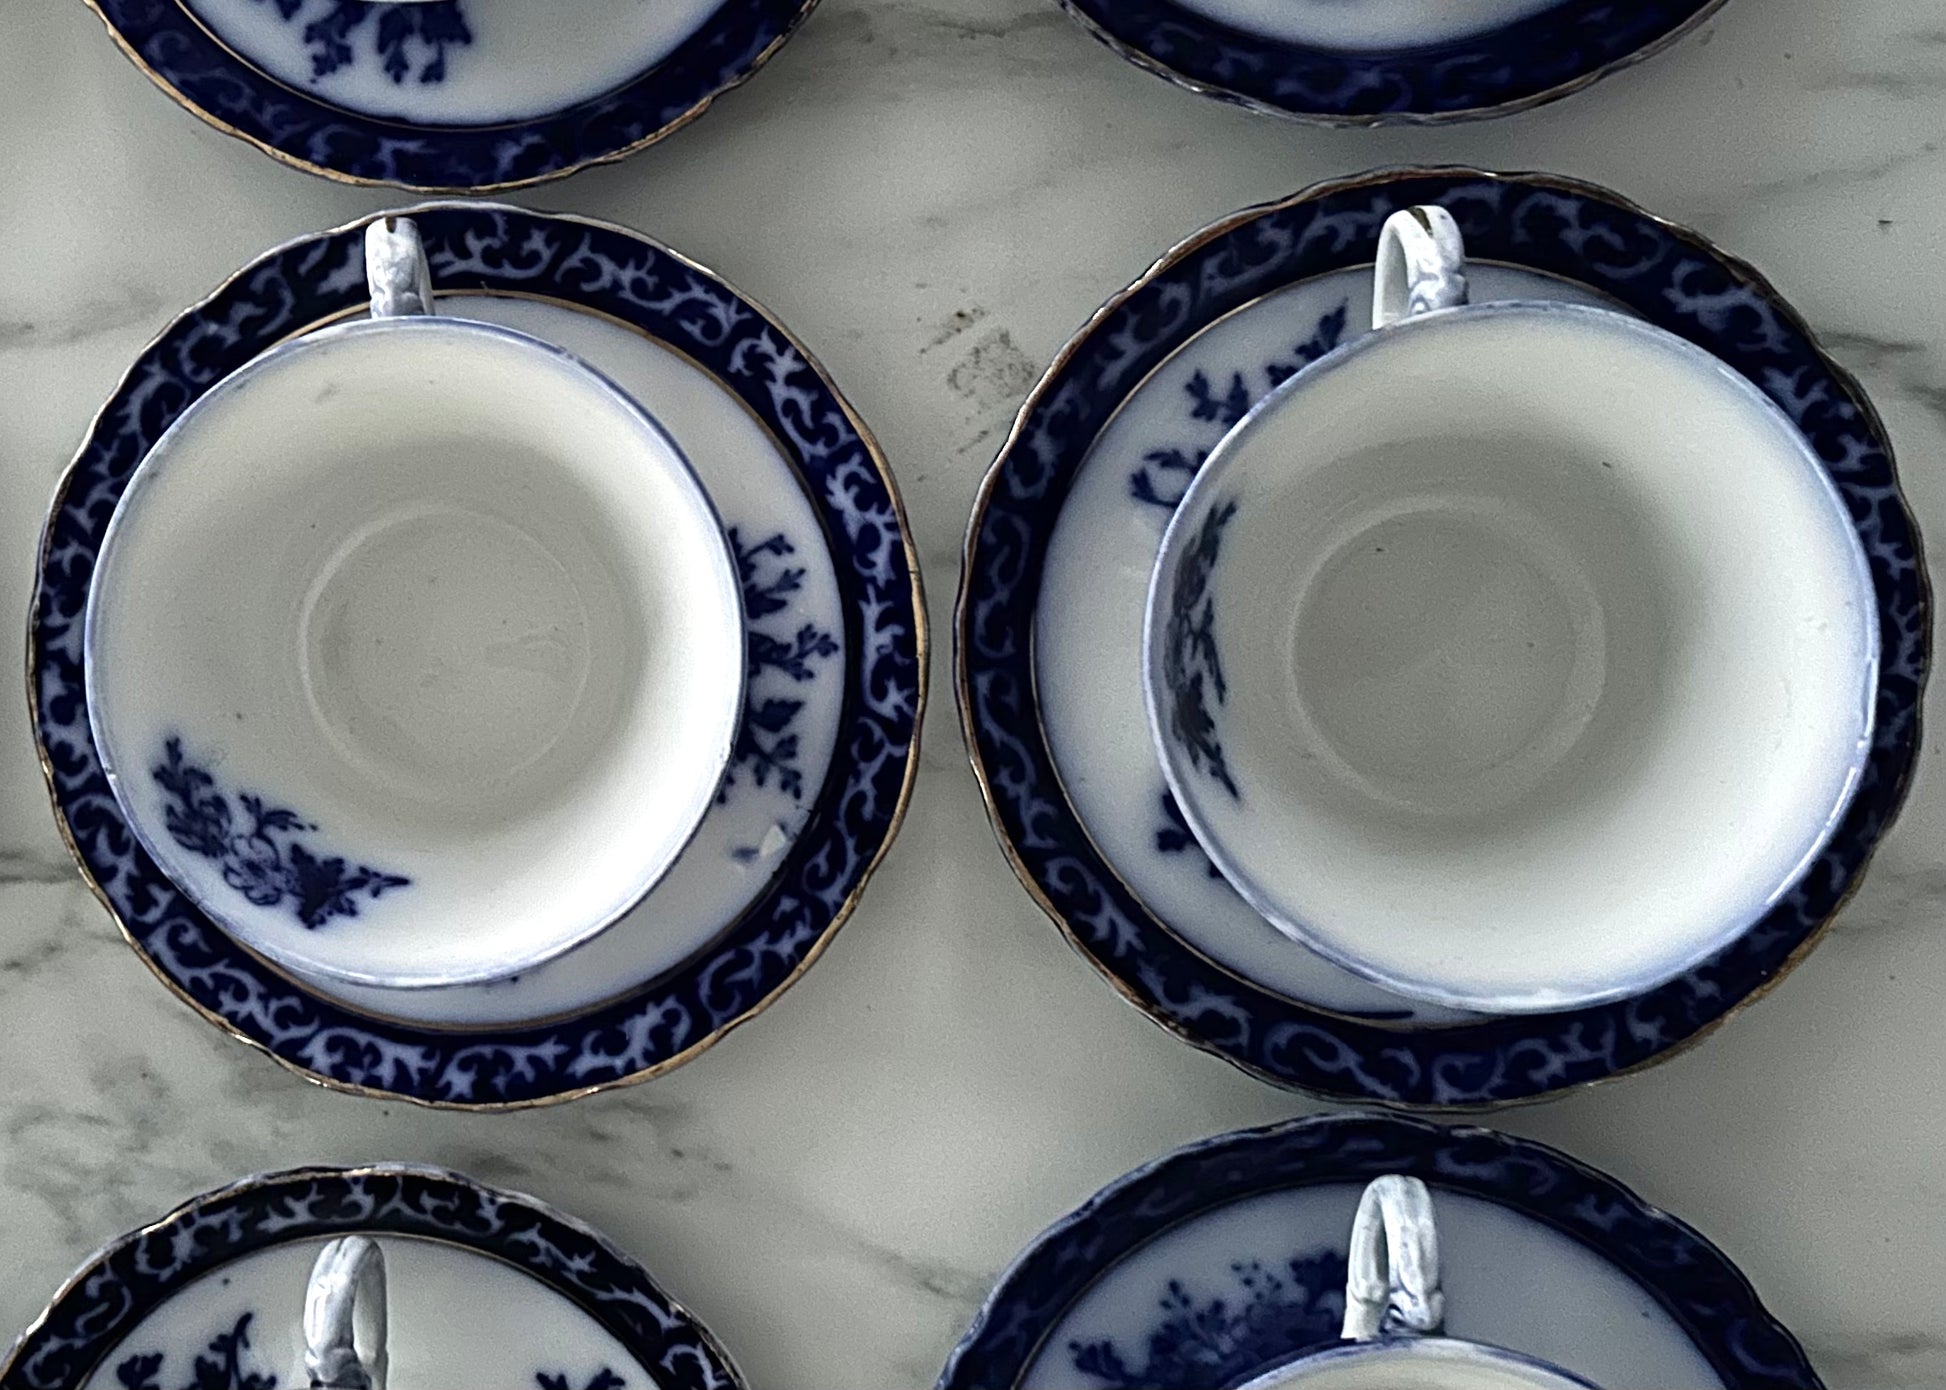 Antique english tea cups and soucers by Touraine Stanley ... Circa 1900-1909 - DharBazaar